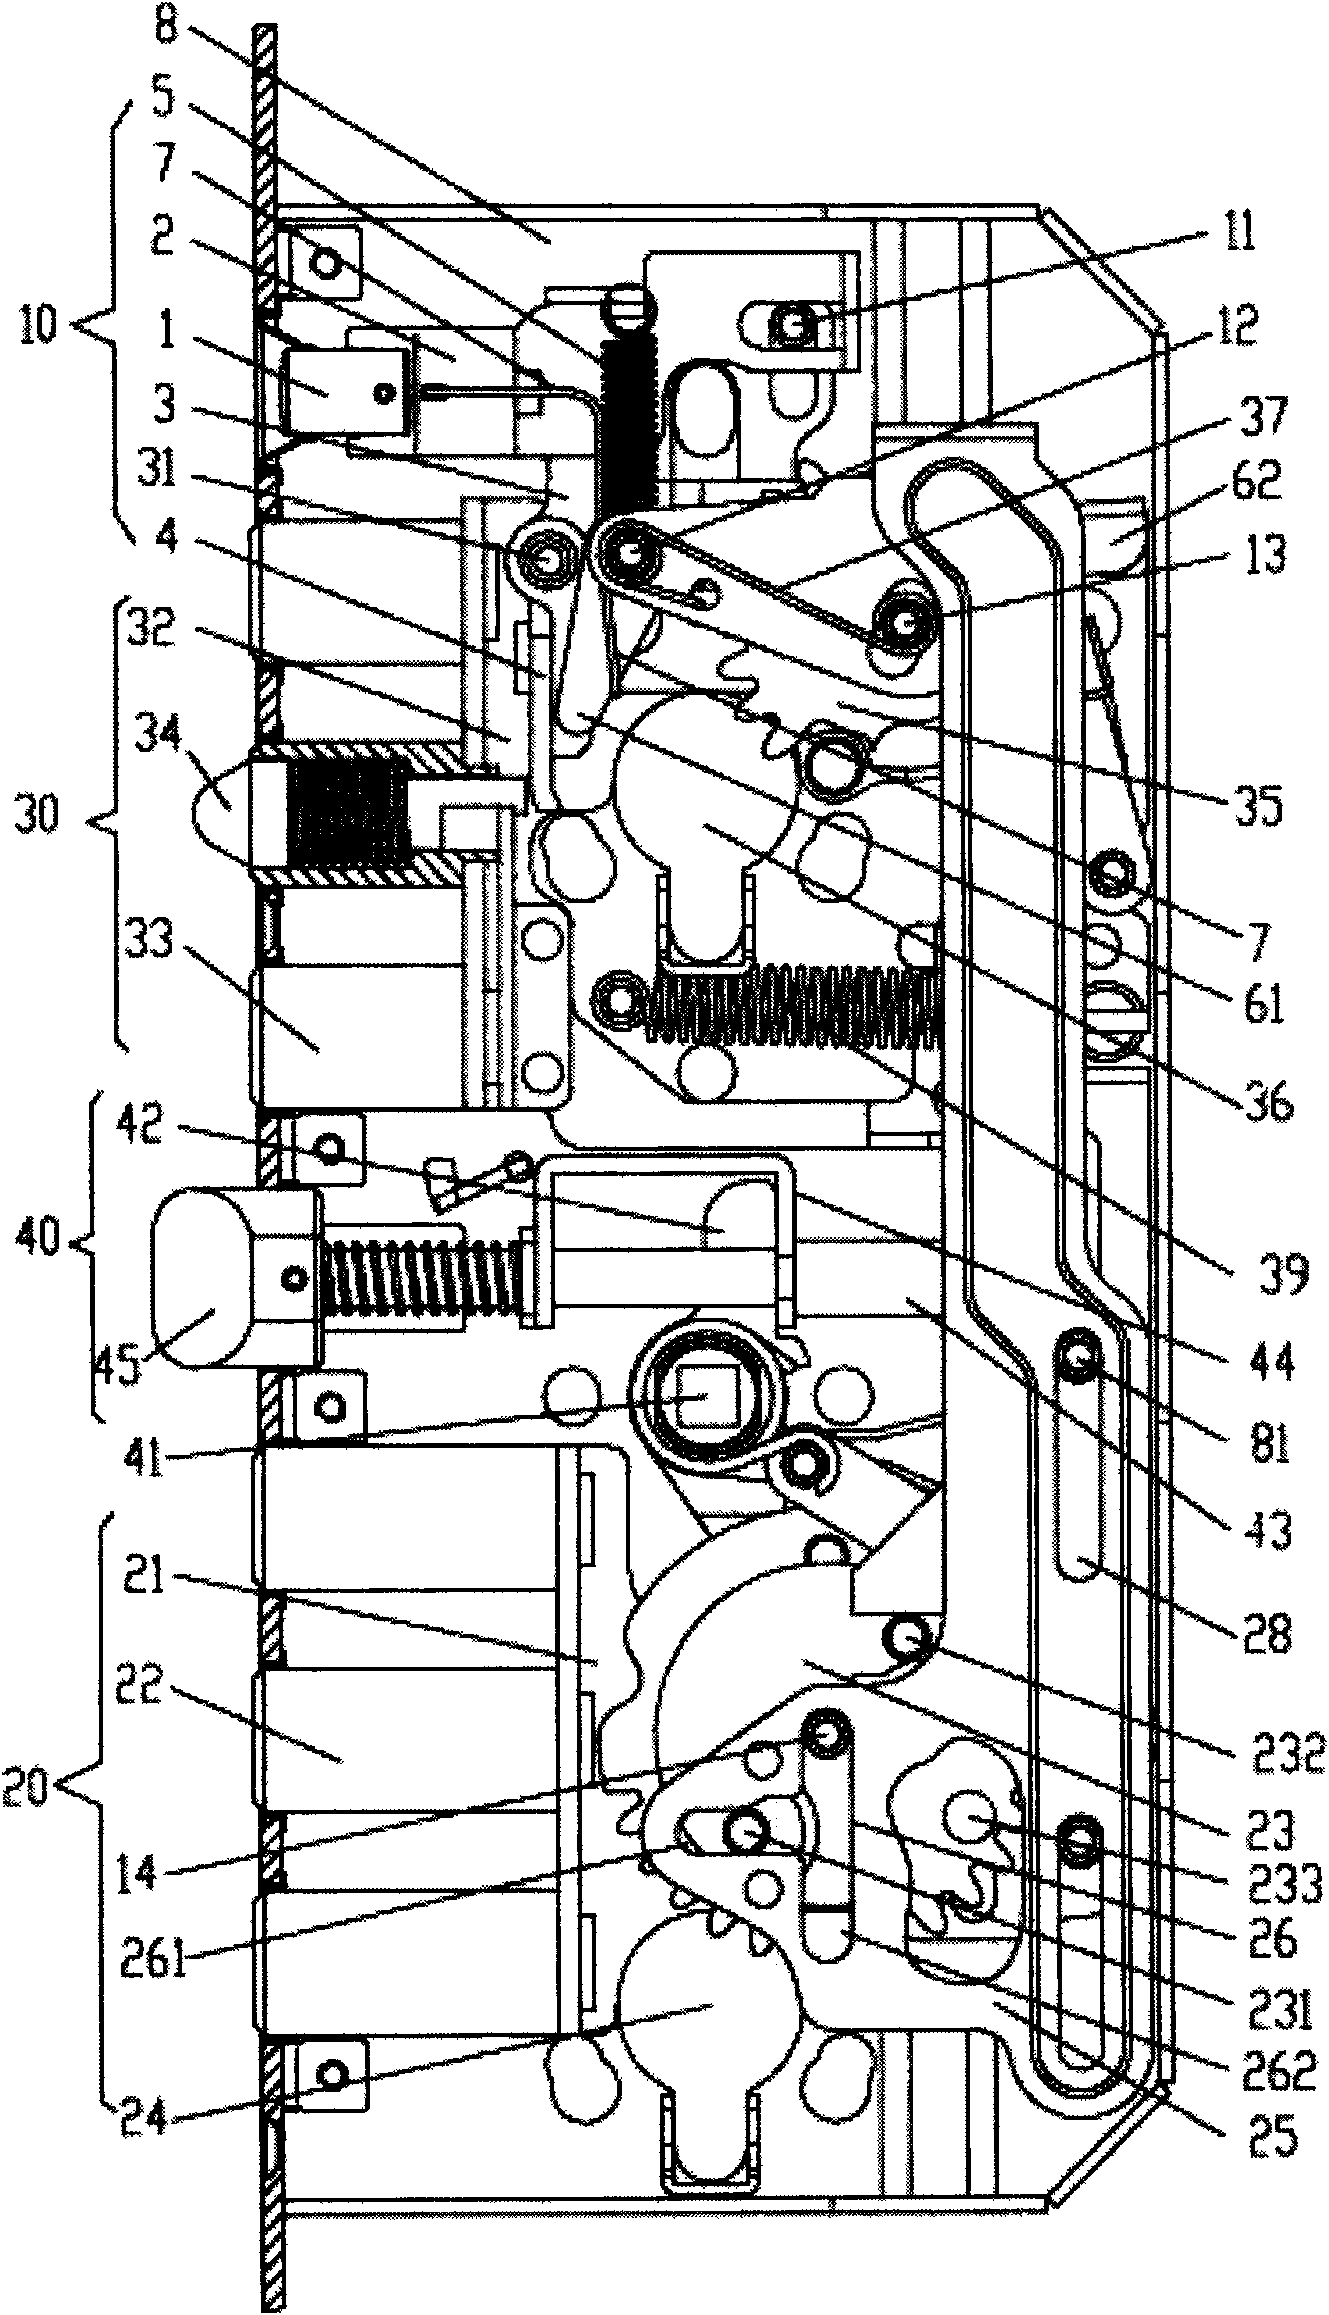 Three-in-one adjustable automatic locking body